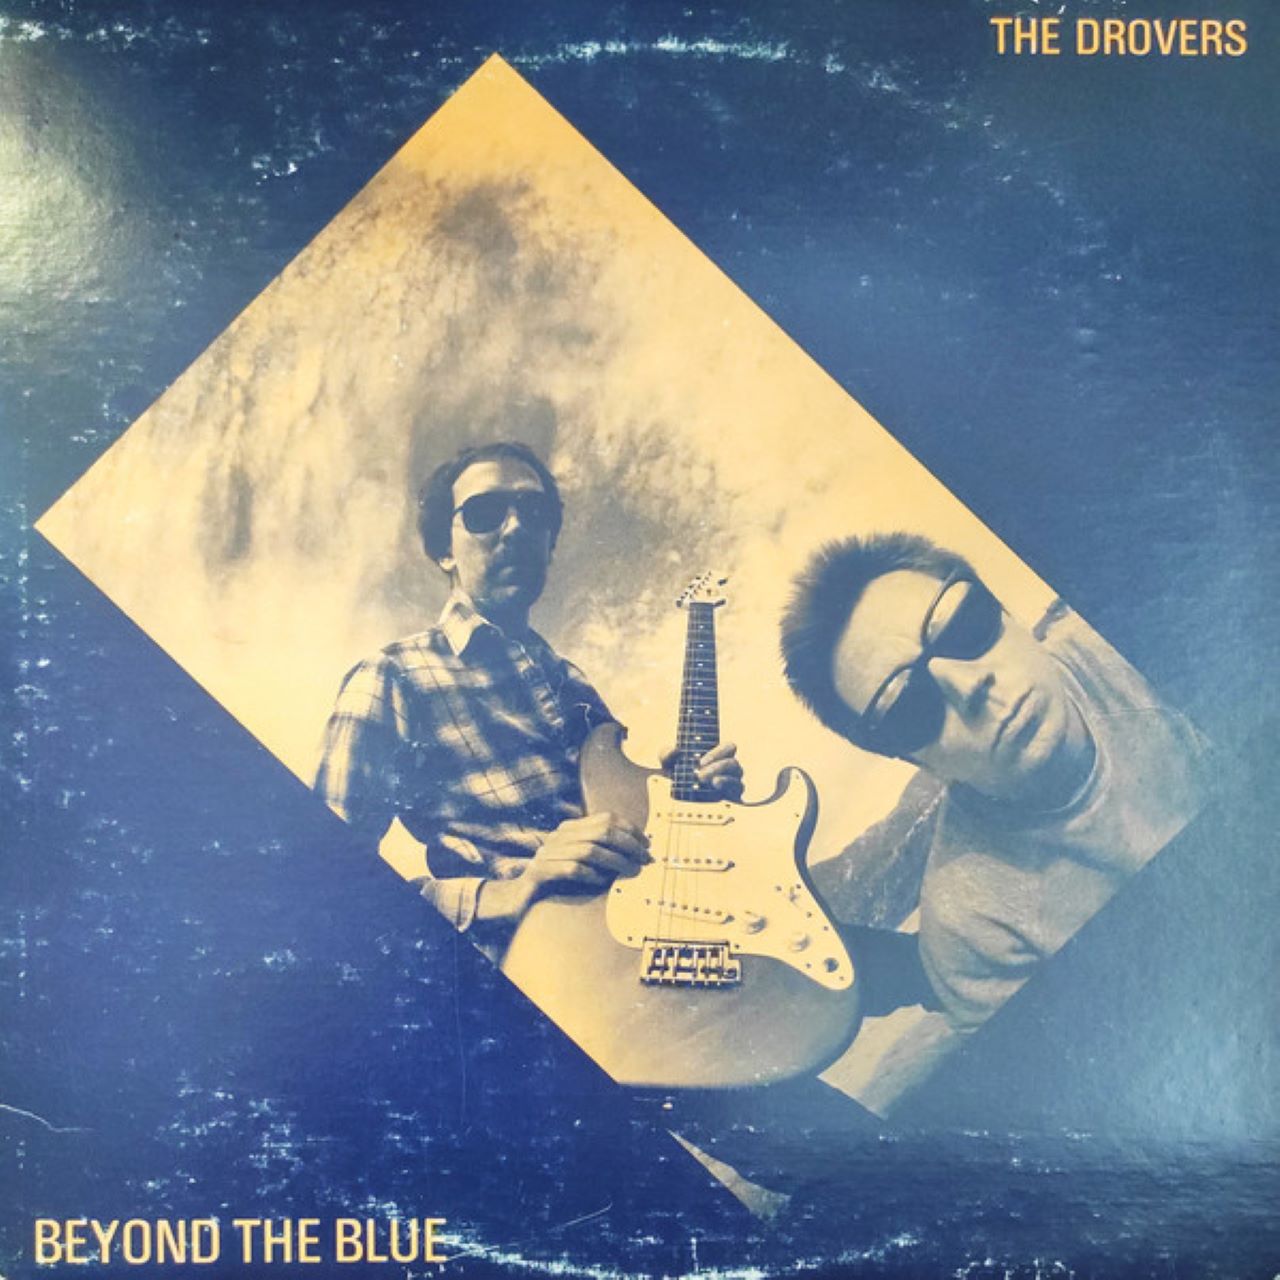 Drovers - Beyond The Blue cover album